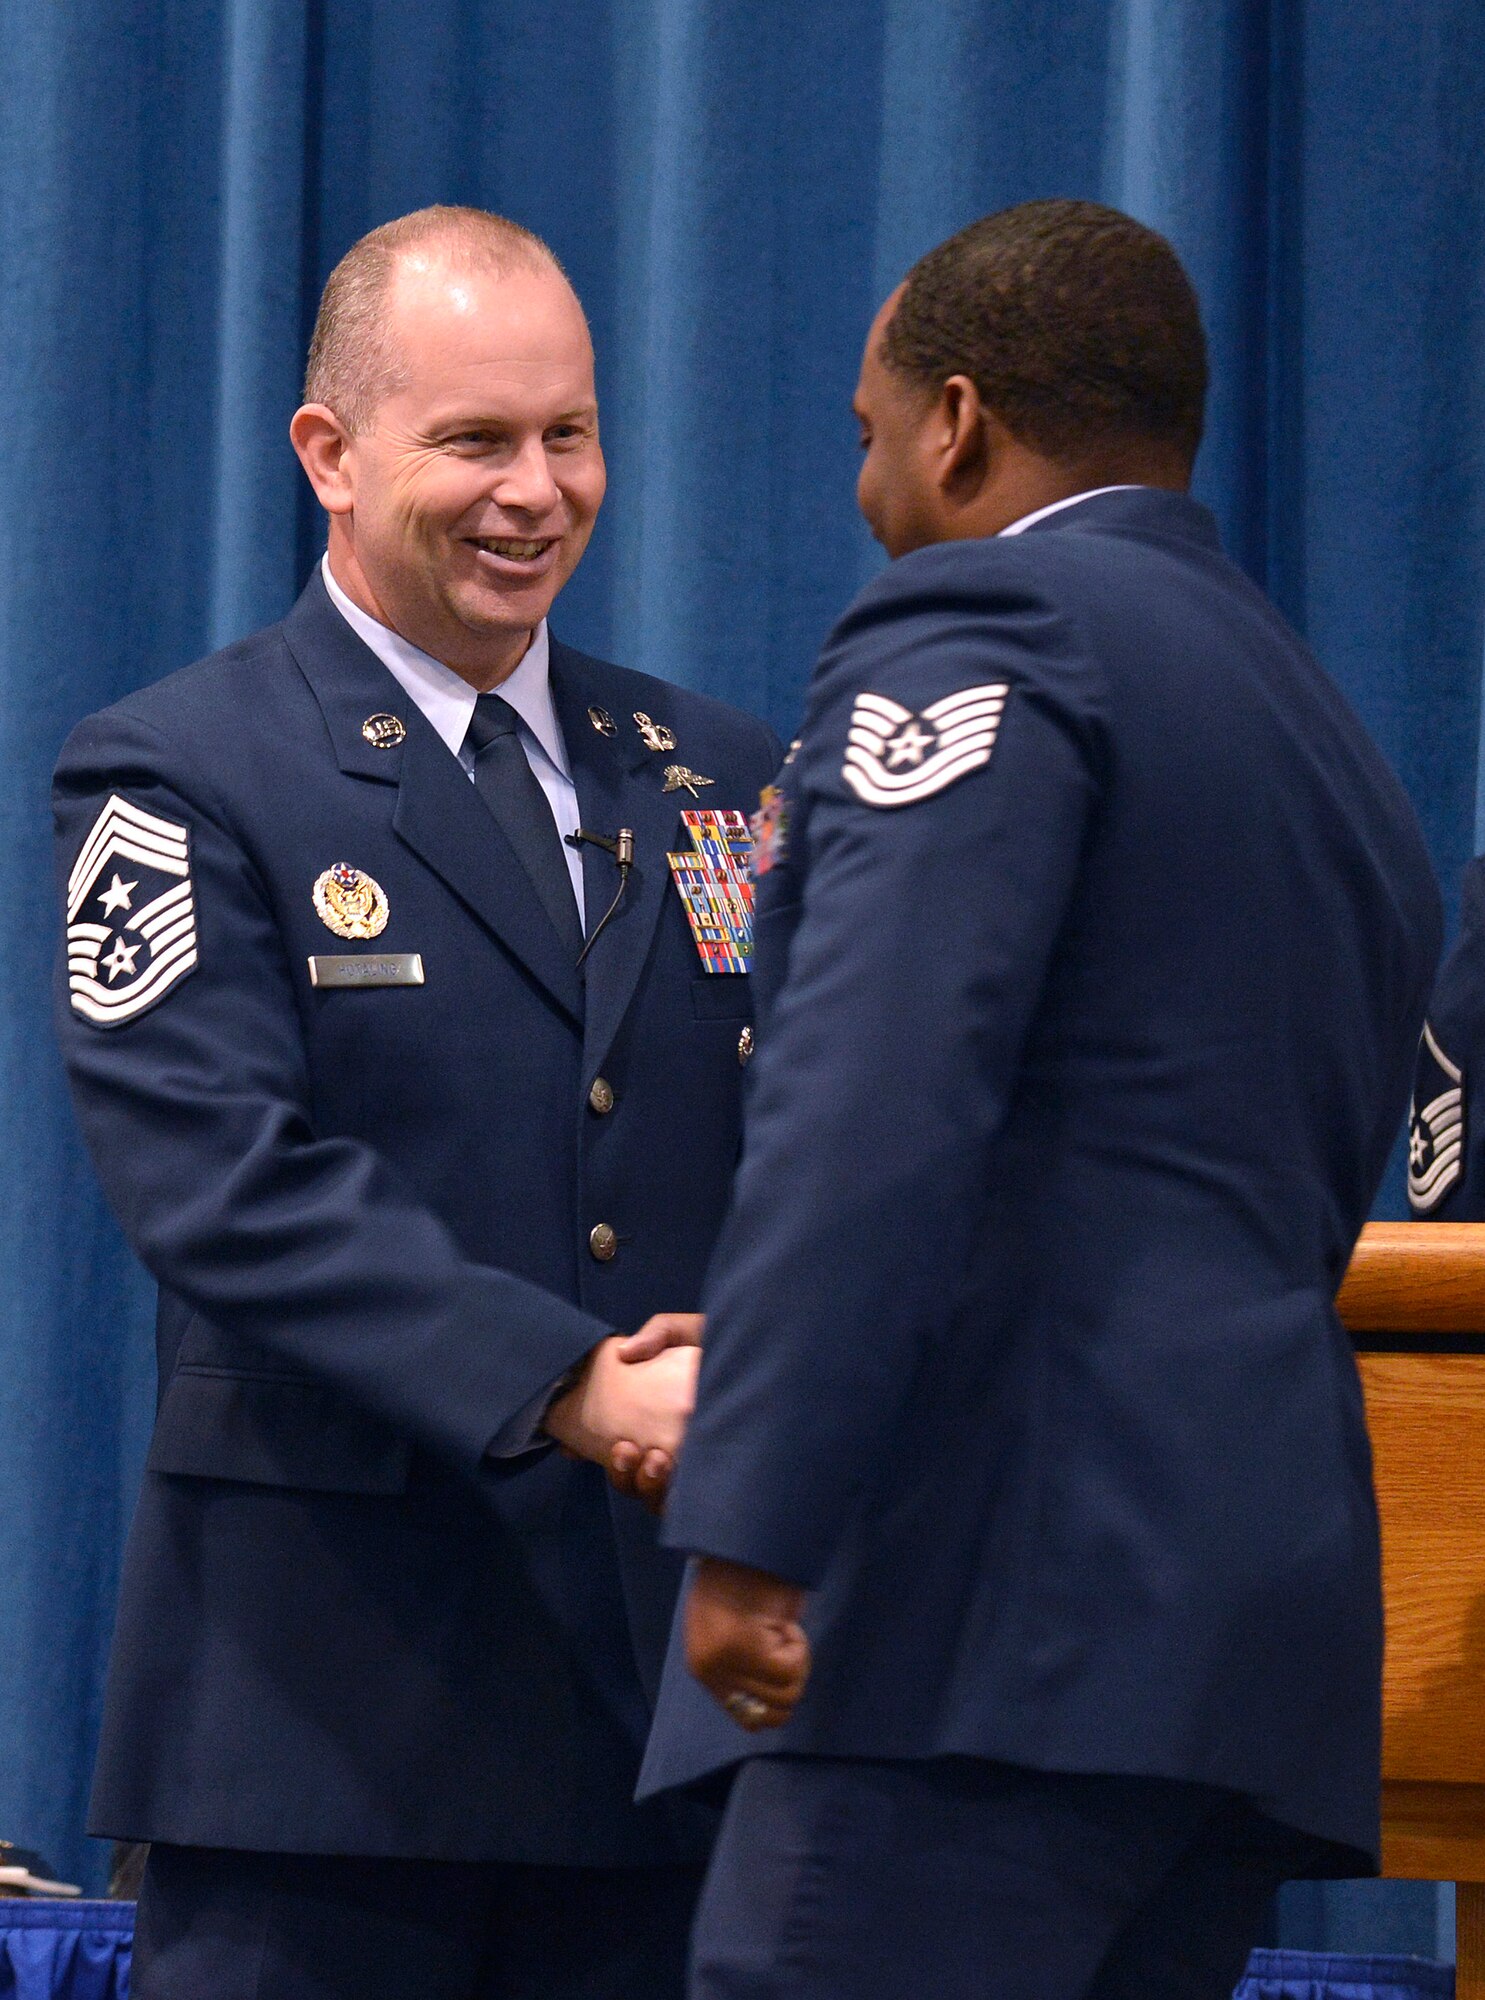 Chief Master Sgt. Jim Hotaling, left, Command Chief Master Sergeant of the Air National Guard shakes hands with graduating Airmen from the EPME academy at the I. G. Brown Training and Education Center here, Feb. 14. Students attending the Noncommissioned Officer Academy and Airmen Leadership School totaled 314 for the six and five week classes. (National Guard photo by Master Sgt. Kurt Skoglund)